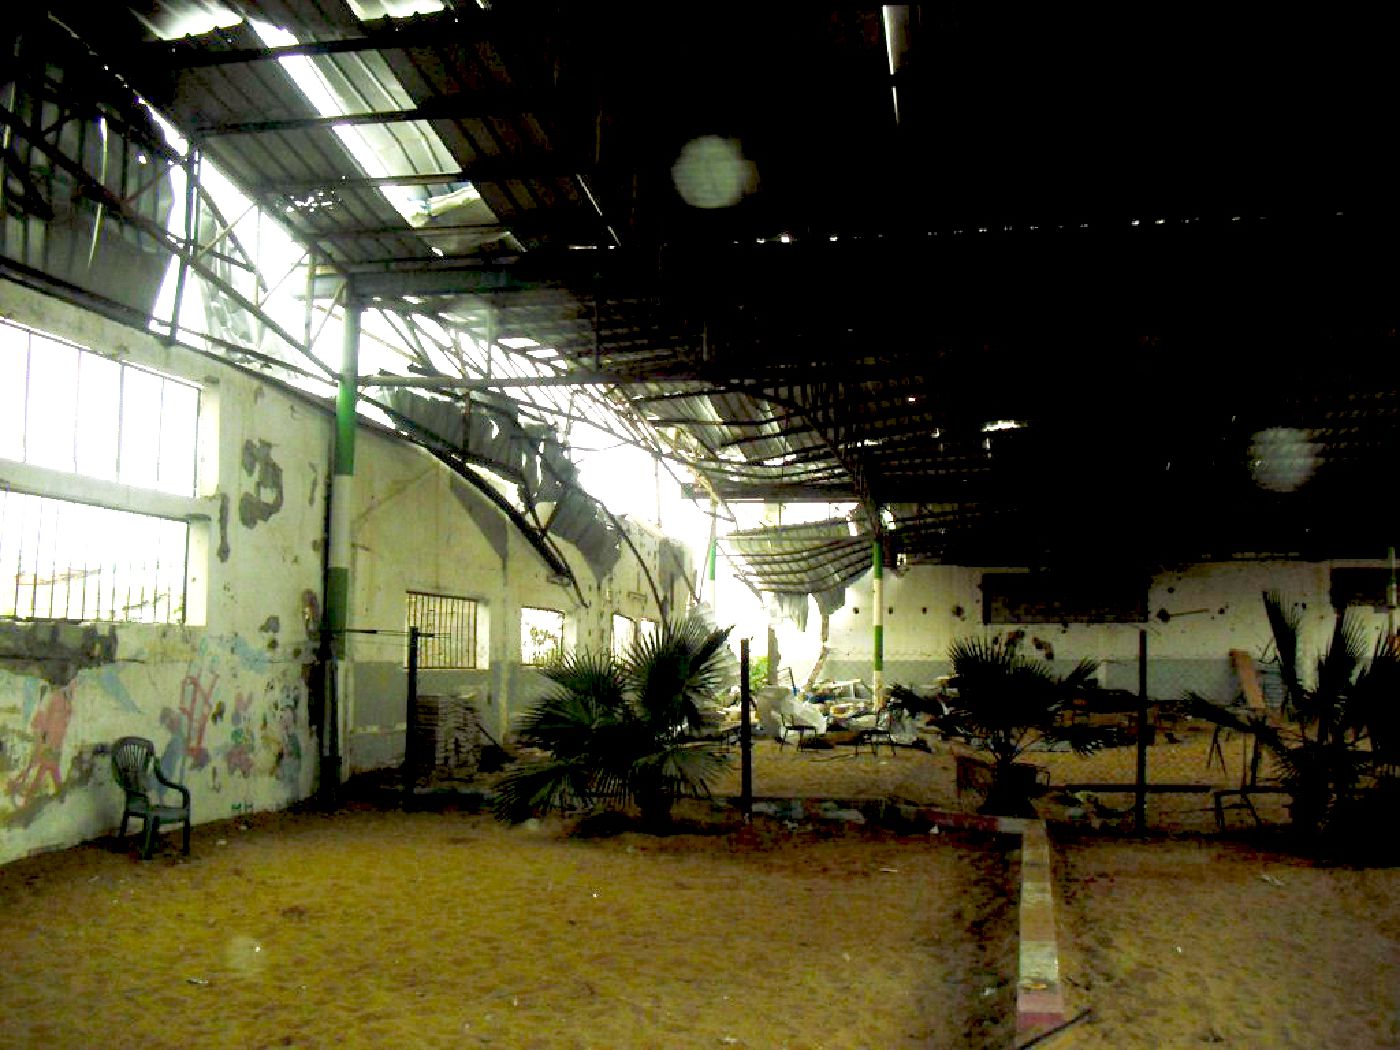 School hit by an airstrike targeting a nearby factory in Feb 2011. Photo by Bilal Al-Hamaydah, UNESCO